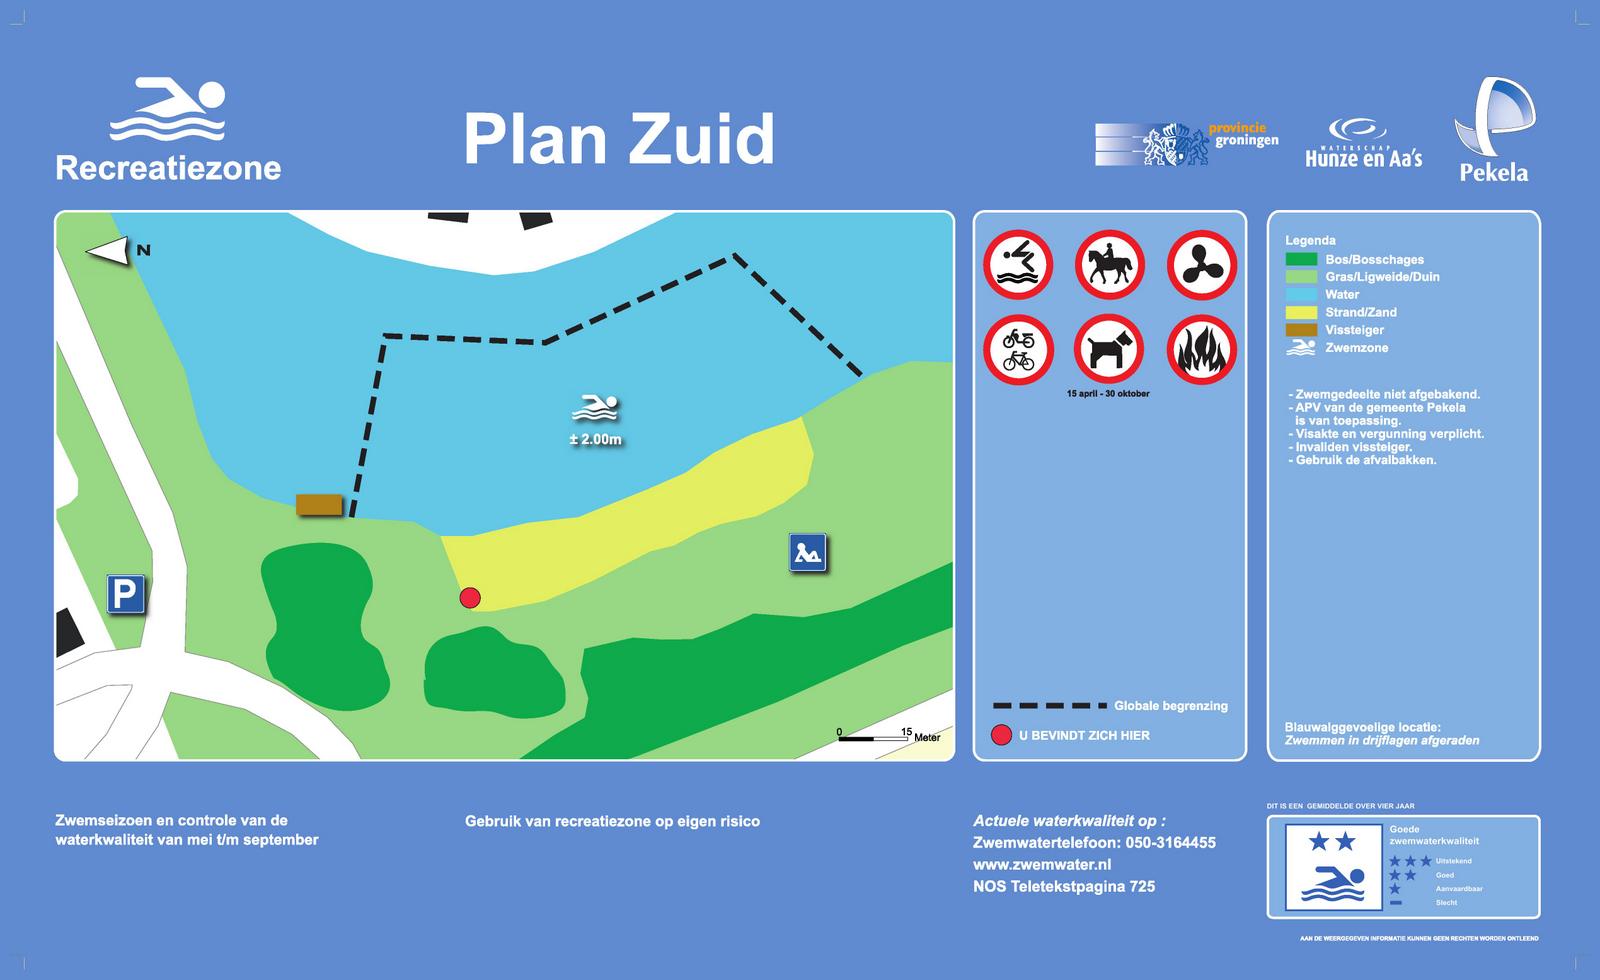 The information board at the swimming location Plan Zuid, Oude Pekela